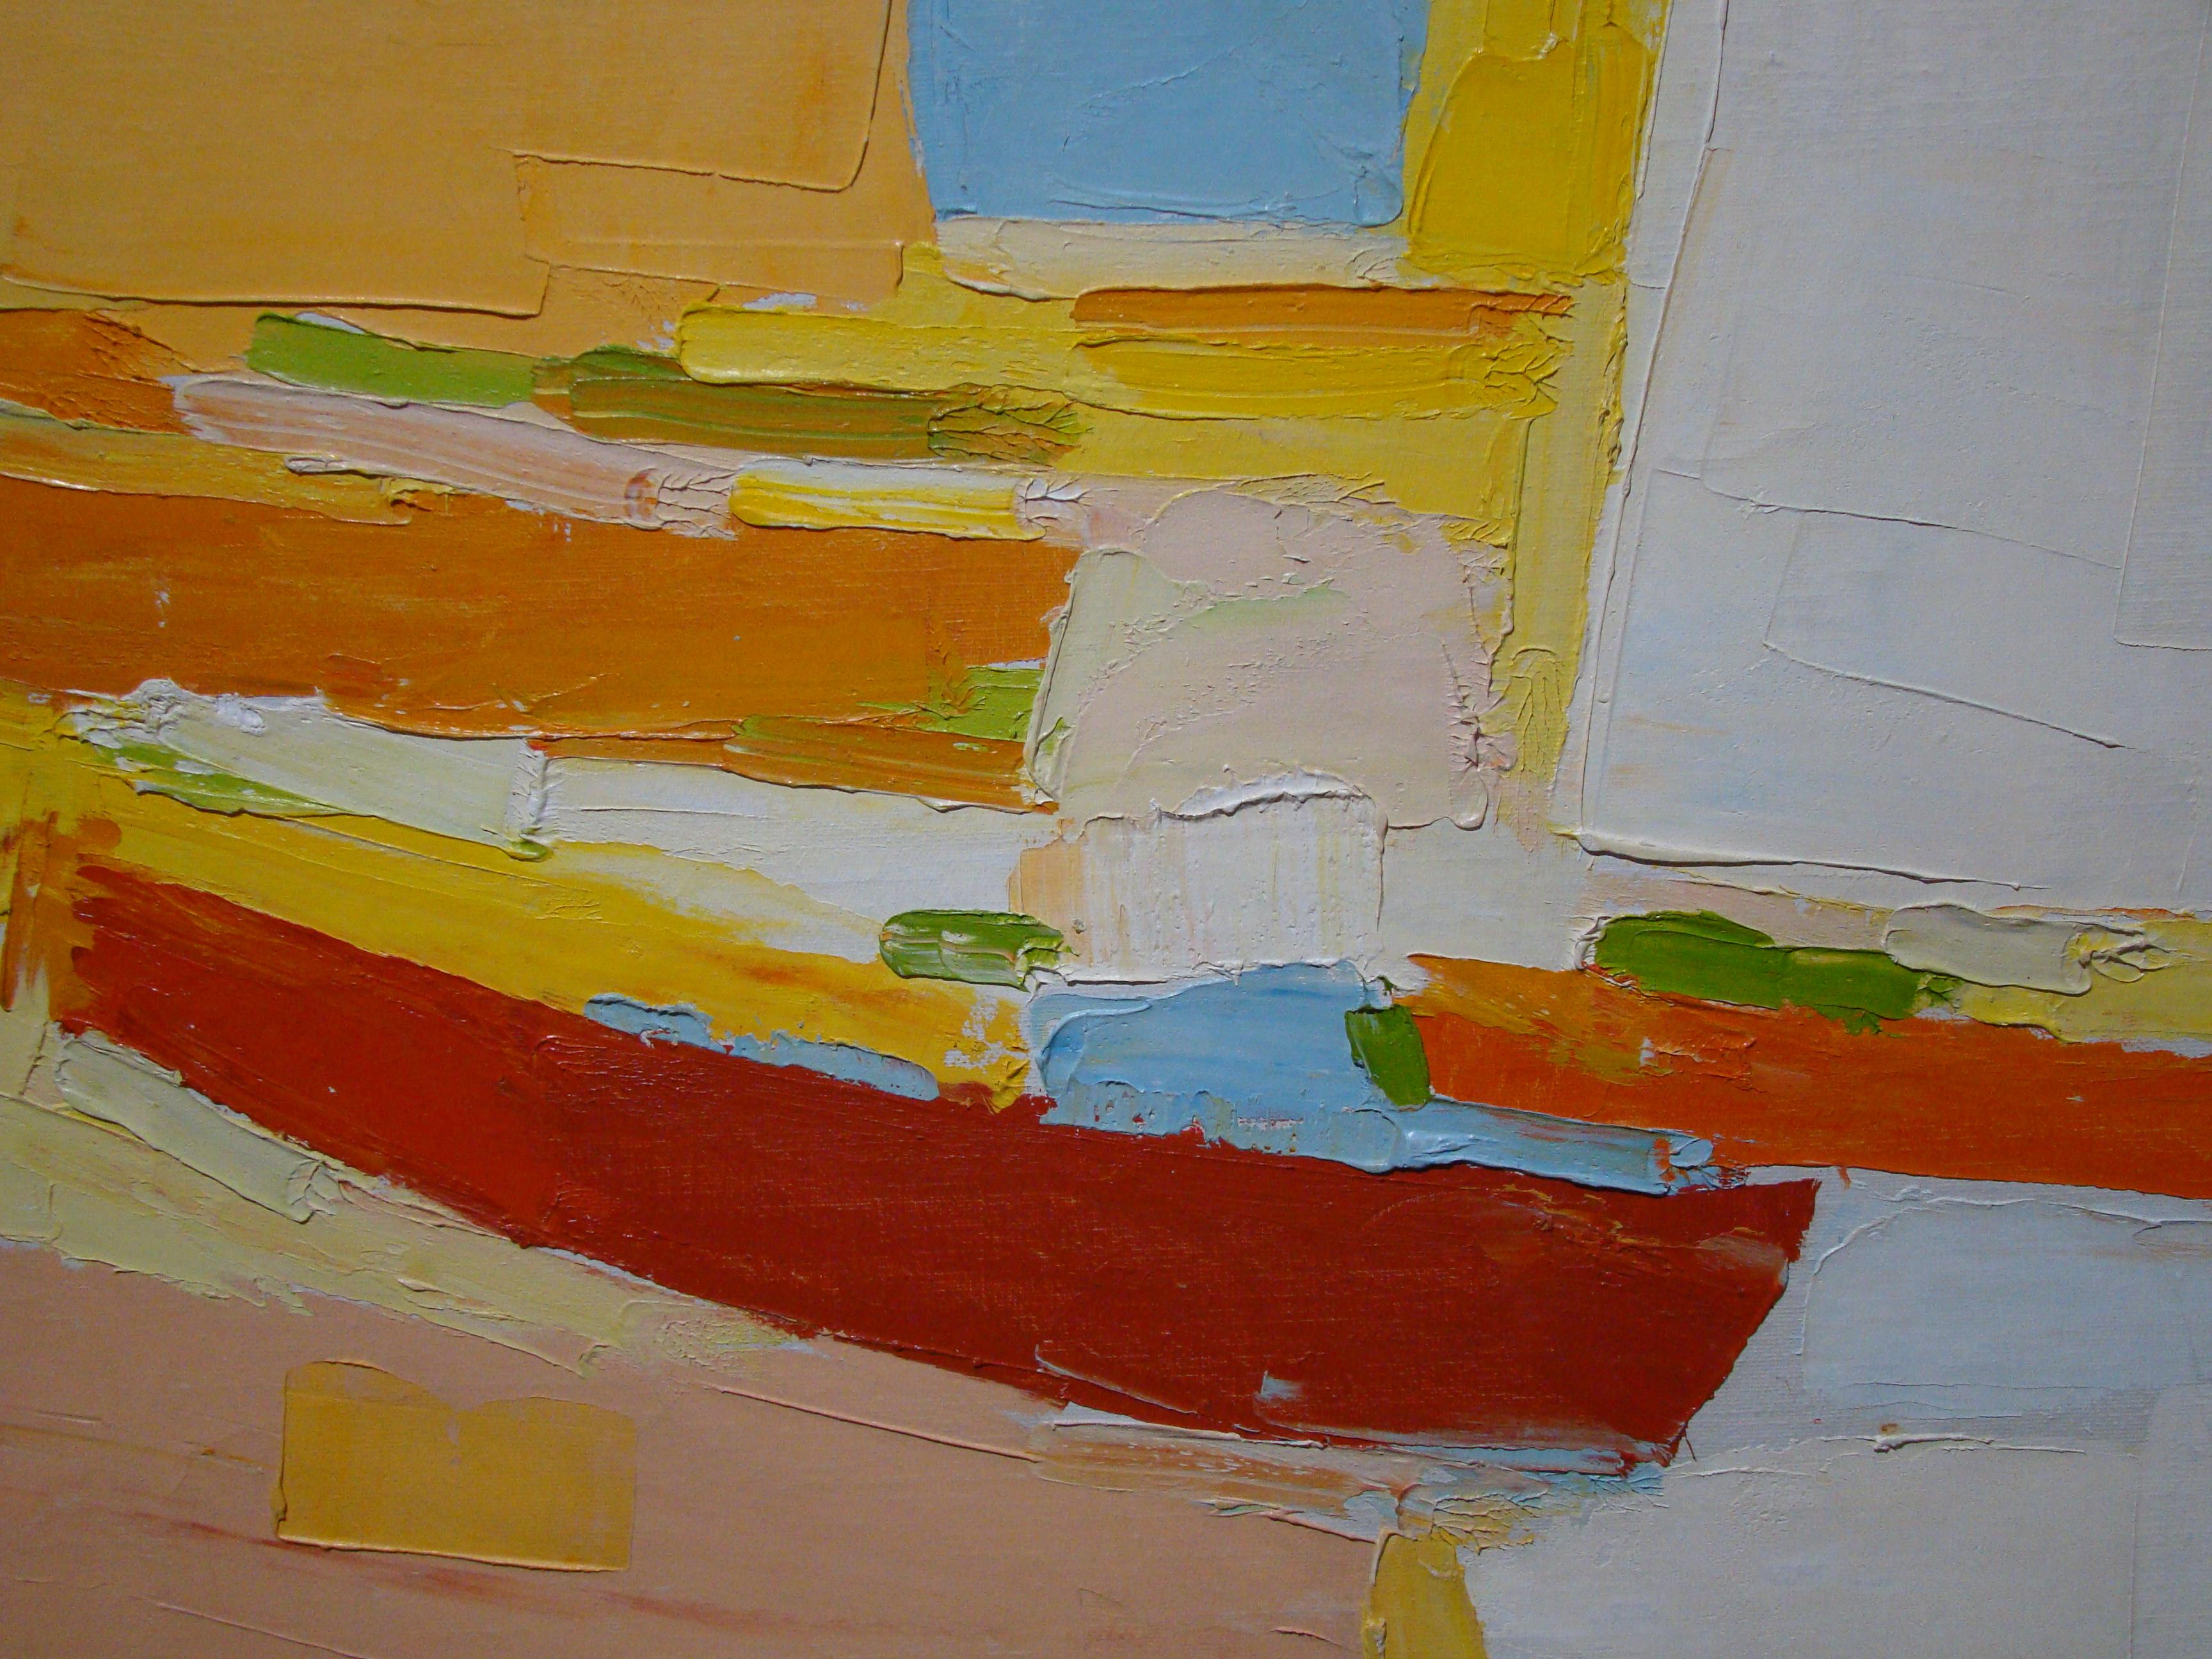 Painted Large Abstract Oil on Canvas by Italo Botti 